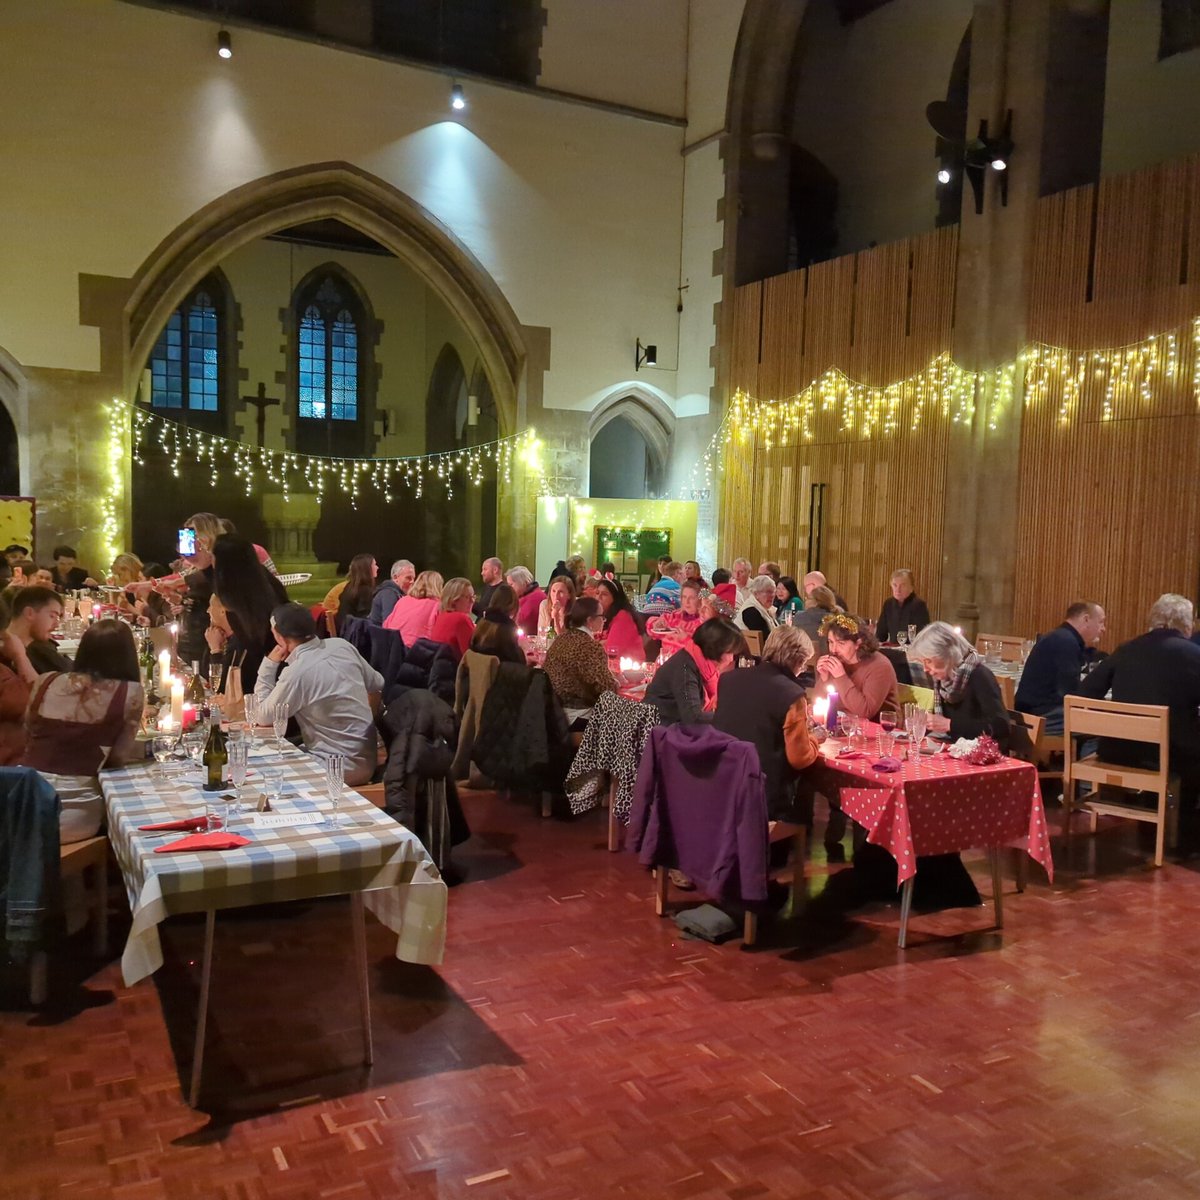 There is a great Xmas vibe at the community lunch fundraiser at @revdsuemakin Thanks to generous donations from @HackneyGelato @GingerPigLtd @e5bakehouse JonathanMorria